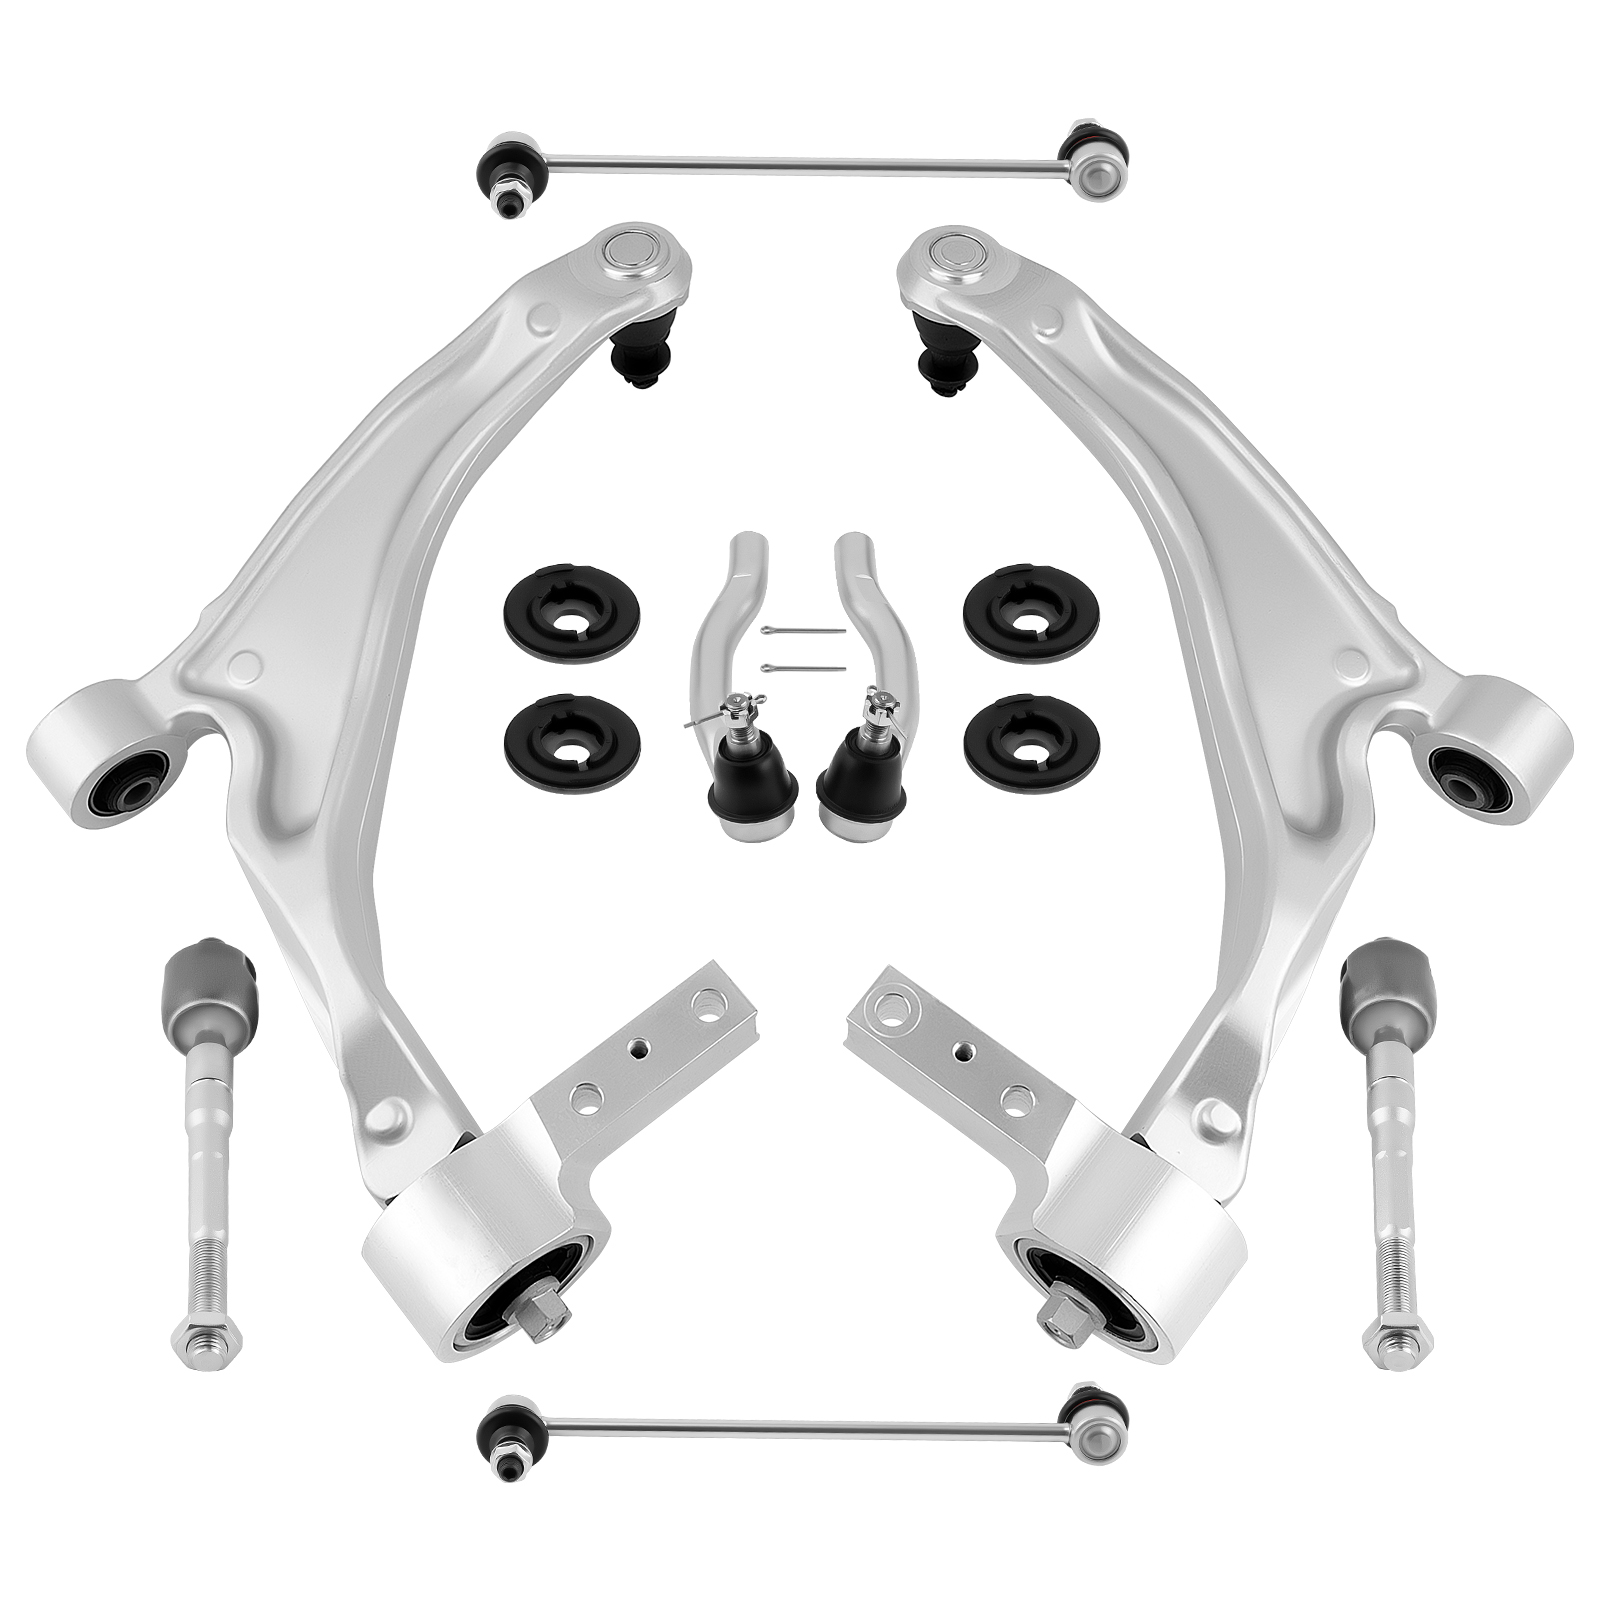 8pcs front lower control arm w/ ball joint kit lhrh compatible for acura mdx 2007 - 2013